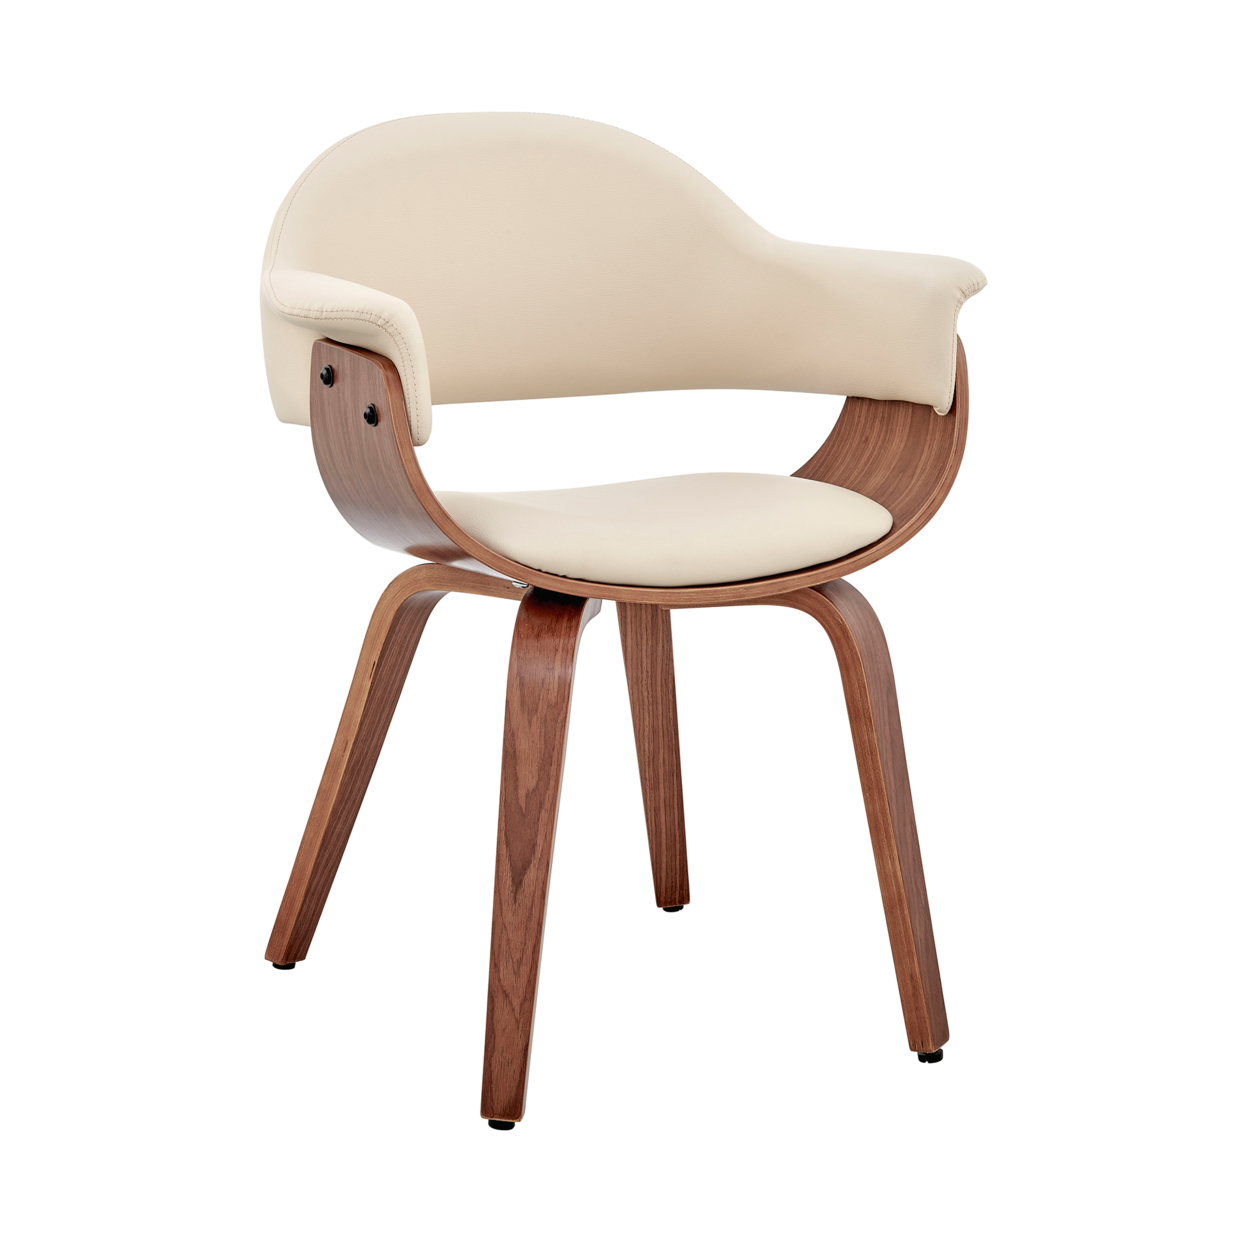 Leatherette Dining Chair With Curved Seat, Cream And Brown- Saltoro Sherpi